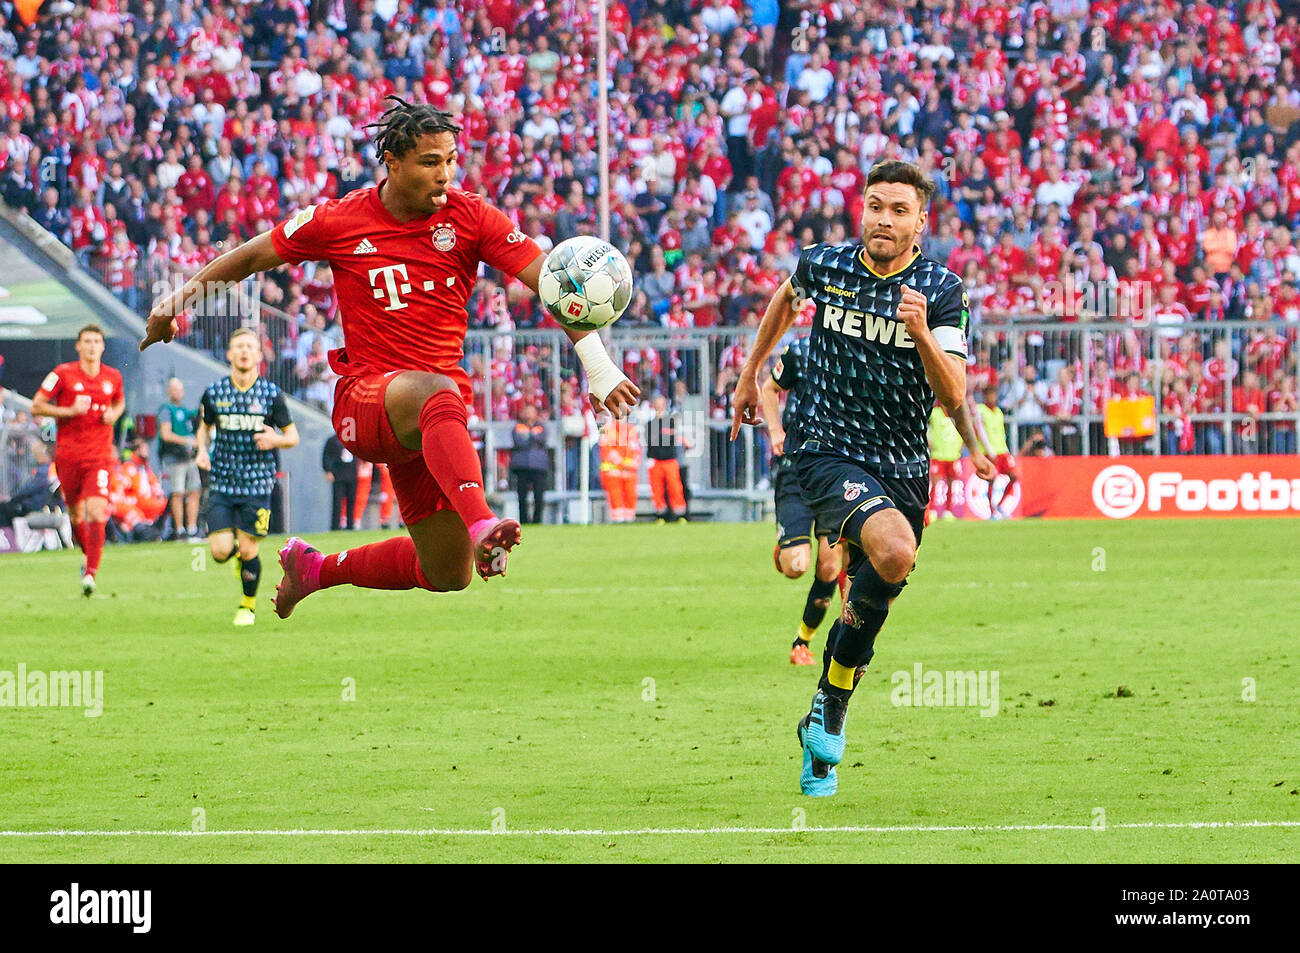 Munich, Germany. 21st Sep, 2019. Serge GNABRY, FCB 22 compete for the ball, tackling, duel, header, zweikampf, action, fight against Jonas HECTOR, 1.FCK 14 FC BAYERN MUNICH - 1.FC KÖLN 4-0 - DFL REGULATIONS PROHIBIT ANY USE OF PHOTOGRAPHS as IMAGE SEQUENCES and/or QUASI-VIDEO - 1.German Soccer League, Munich, September 21, 2019 Season 2019/2020, matchday 05, FCB, München, Cologne Credit: Peter Schatz/Alamy Live News Stock Photo